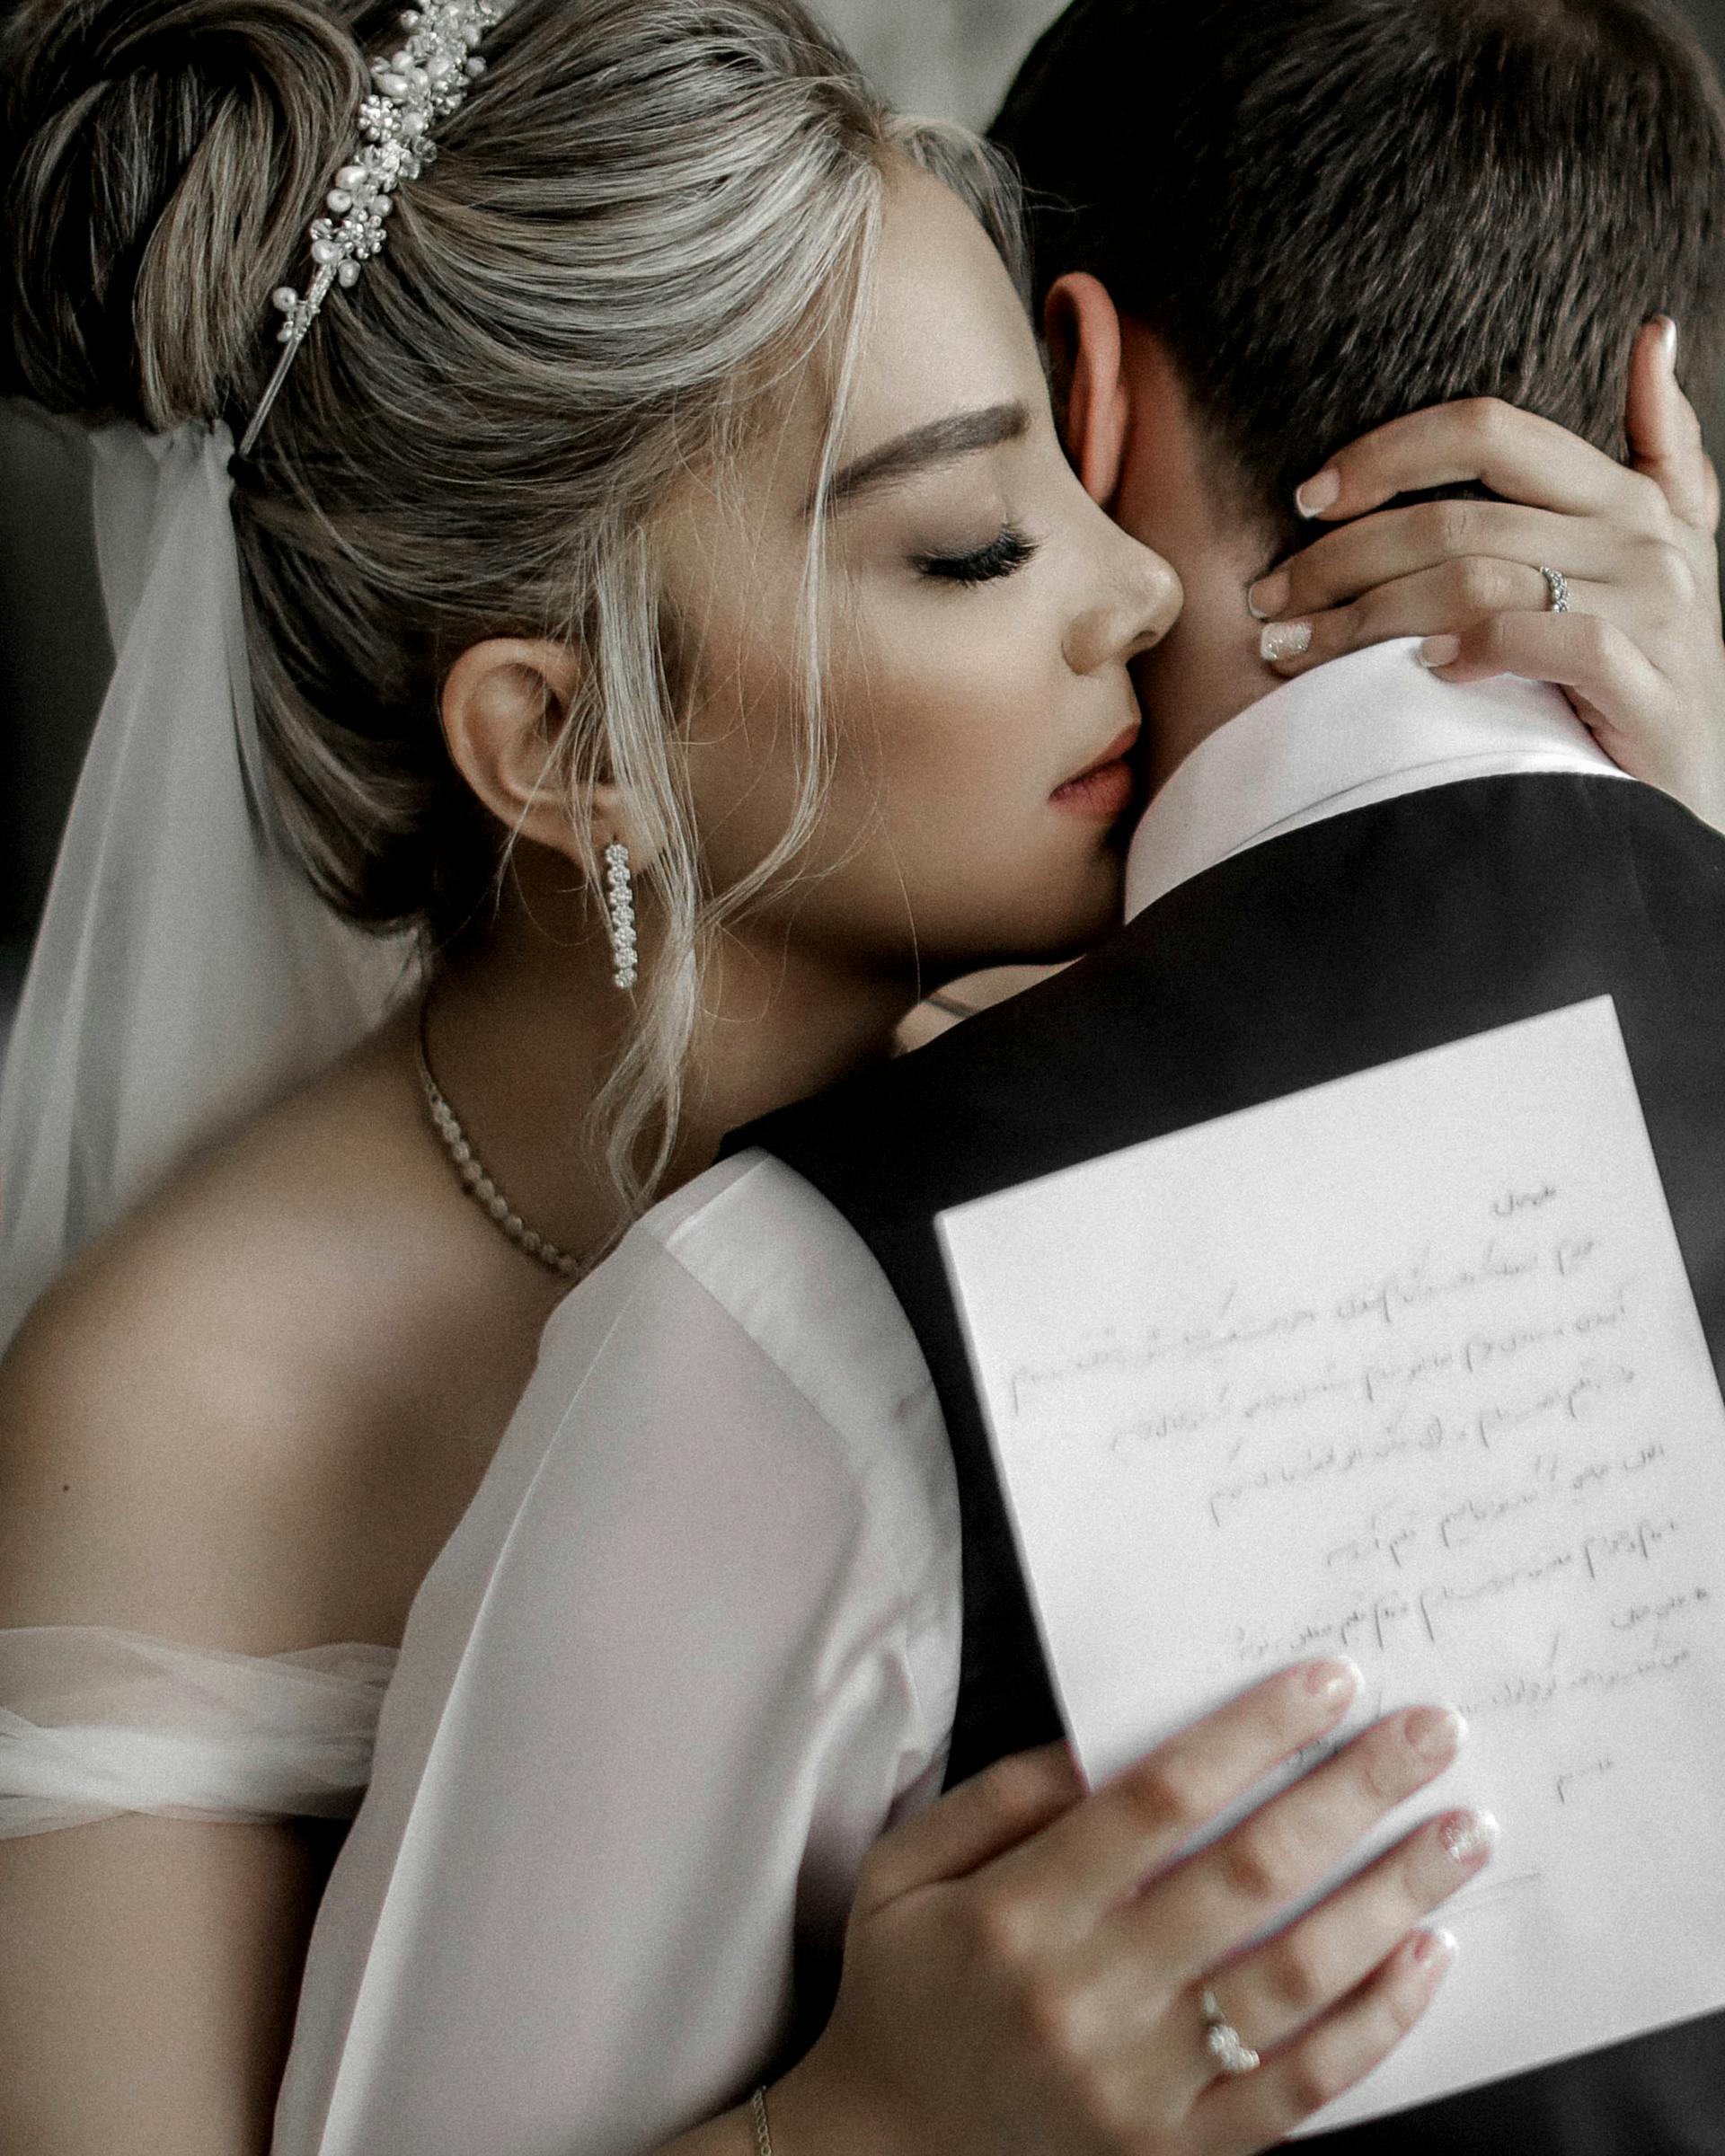 A bride hugging a groom while holding a piece of paper | Source: Pexels